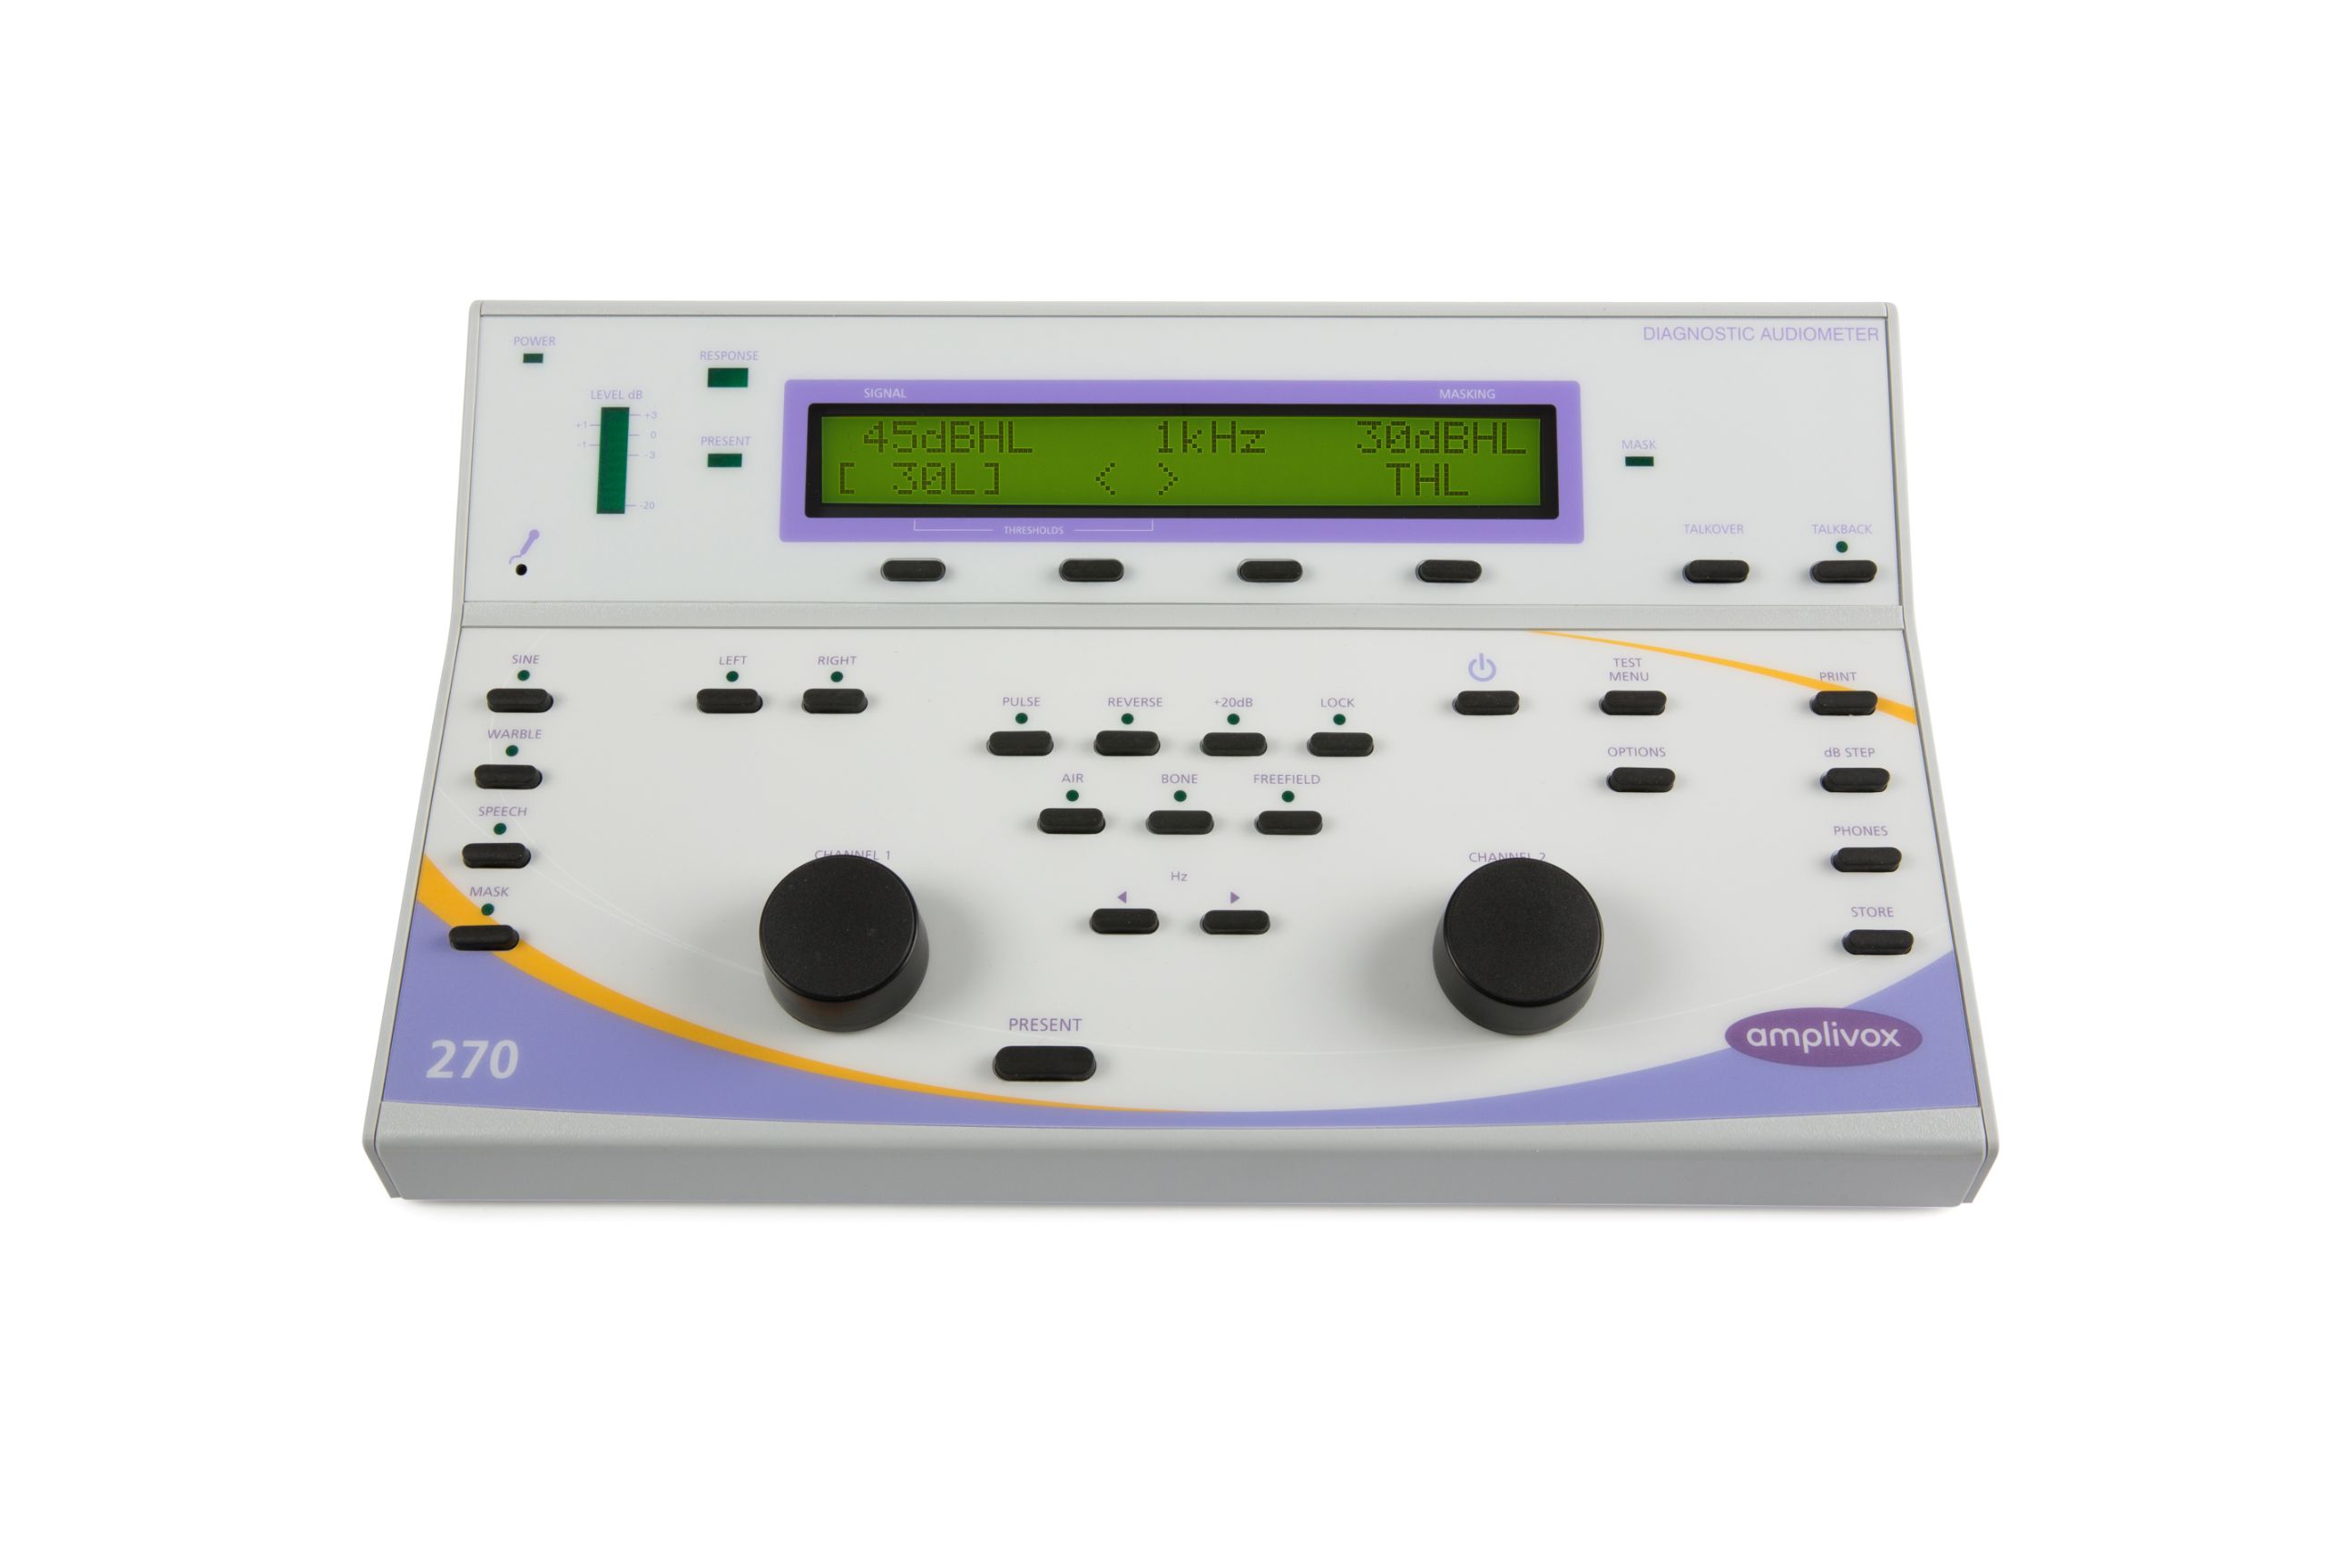 Amplivox 270 Diagnostic Audiometer with Audiocups